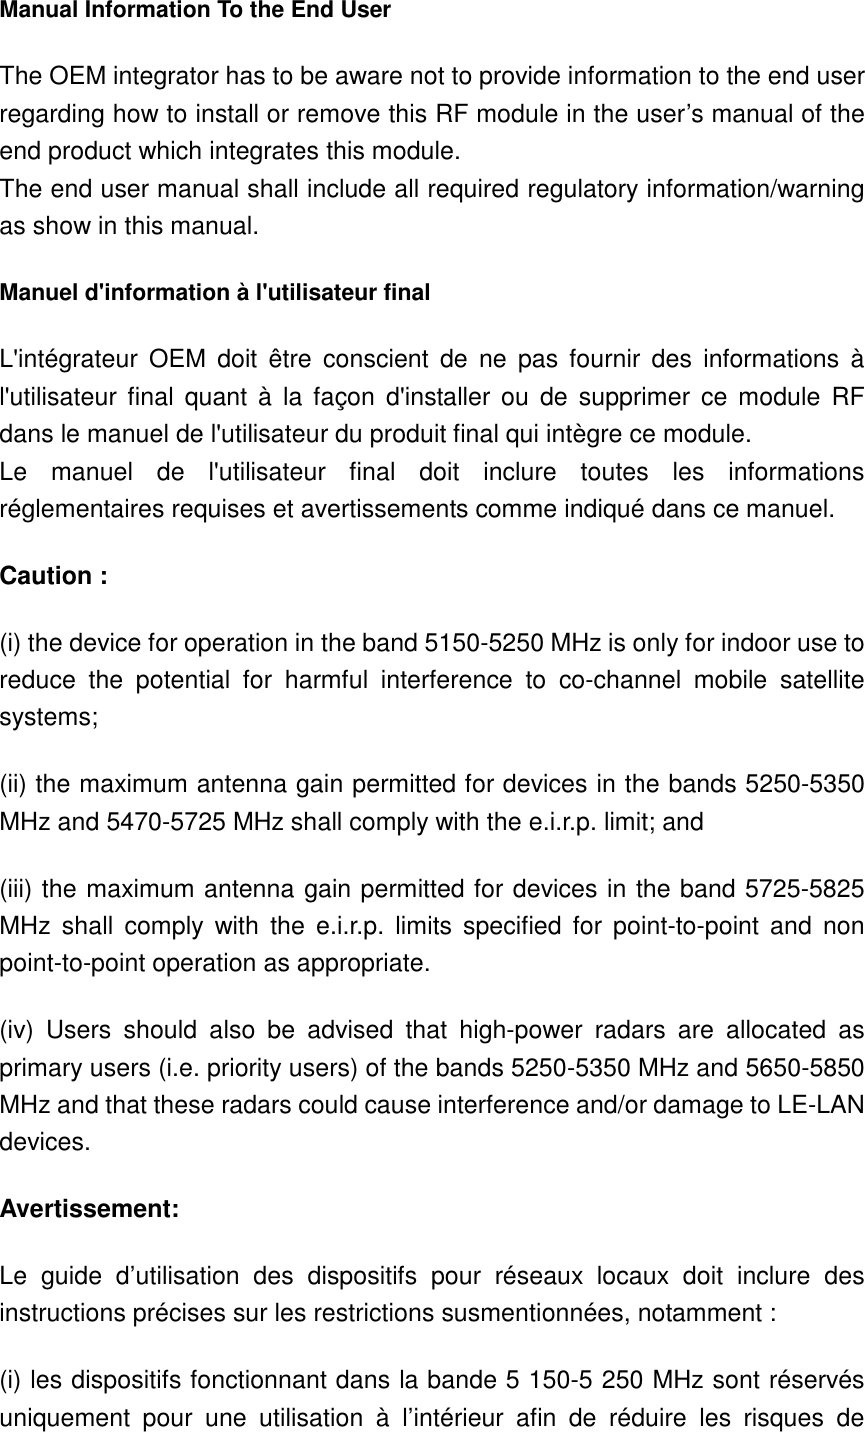 Manual Information To the End User The OEM integrator has to be aware not to provide information to the end user regarding how to install or remove this RF module in the user’s manual of the end product which integrates this module. The end user manual shall include all required regulatory information/warning as show in this manual. Manuel d&apos;information à l&apos;utilisateur final L&apos;intégrateur  OEM  doit  être  conscient  de  ne  pas  fournir  des  informations  à l&apos;utilisateur  final  quant  à  la  façon  d&apos;installer ou  de  supprimer  ce module  RF dans le manuel de l&apos;utilisateur du produit final qui intègre ce module. Le  manuel  de  l&apos;utilisateur  final  doit  inclure  toutes  les  informations réglementaires requises et avertissements comme indiqué dans ce manuel. Caution : (i) the device for operation in the band 5150-5250 MHz is only for indoor use to reduce  the  potential  for  harmful  interference  to  co-channel  mobile  satellite systems; (ii) the maximum antenna gain permitted for devices in the bands 5250-5350 MHz and 5470-5725 MHz shall comply with the e.i.r.p. limit; and (iii) the maximum antenna gain permitted for devices in the band 5725-5825 MHz  shall  comply  with  the e.i.r.p.  limits  specified  for  point-to-point  and  non point-to-point operation as appropriate. (iv)  Users  should  also  be  advised  that  high-power  radars  are  allocated  as primary users (i.e. priority users) of the bands 5250-5350 MHz and 5650-5850 MHz and that these radars could cause interference and/or damage to LE-LAN devices. Avertissement: Le  guide  d’utilisation  des  dispositifs  pour  réseaux  locaux  doit  inclure  des instructions précises sur les restrictions susmentionnées, notamment : (i) les dispositifs fonctionnant dans la bande 5 150-5 250 MHz sont réservés uniquement  pour  une  utilisation  à  l’intérieur  afin  de  réduire  les  risques  de 